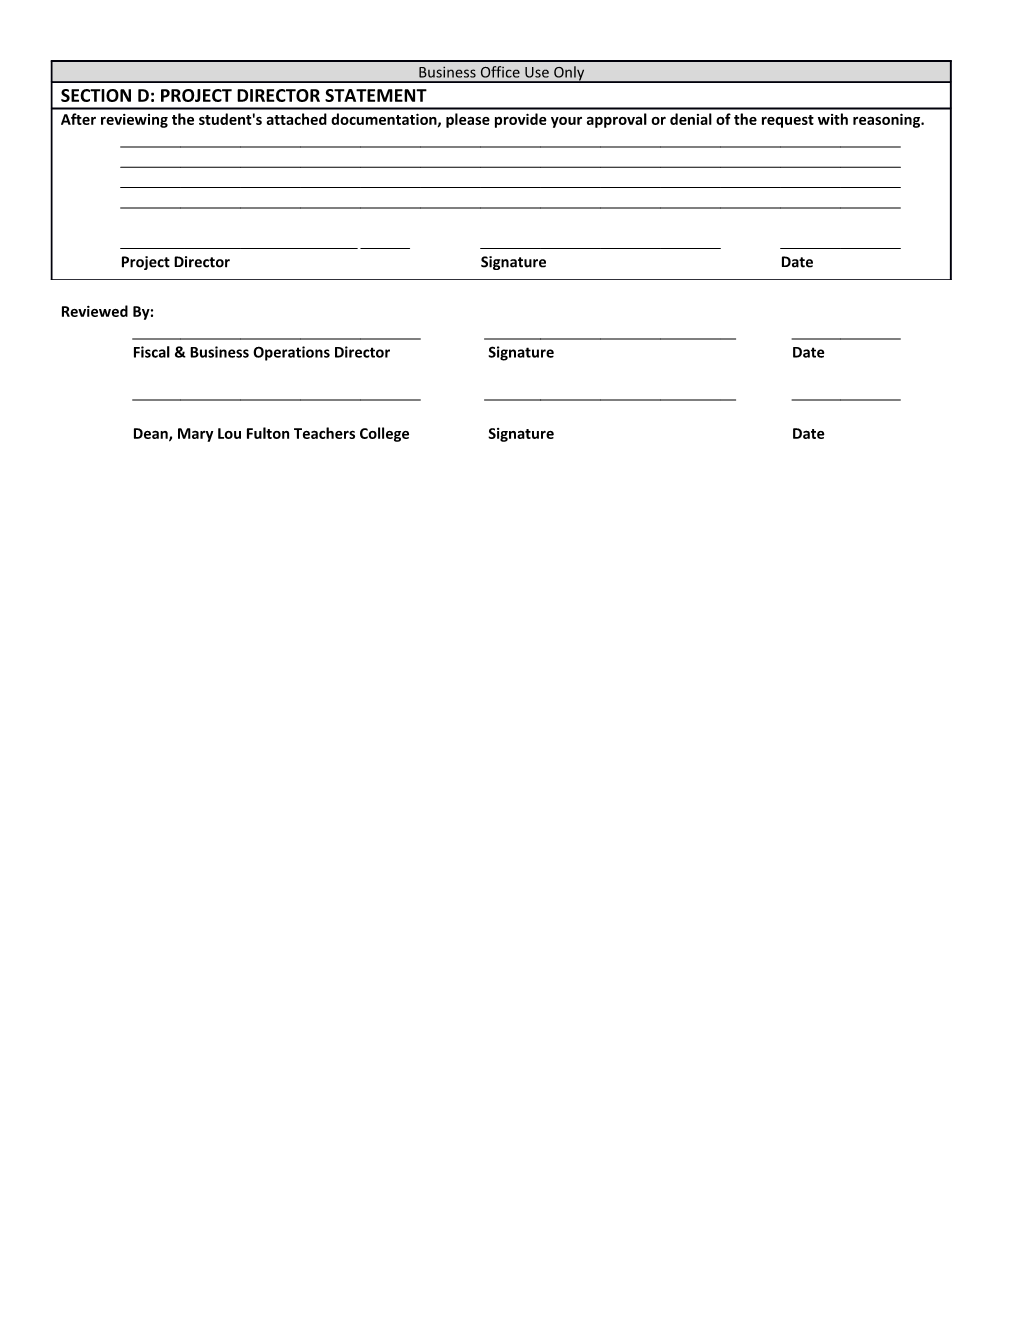 If You Need Assistance with Completing This Form, Please Contact Our Office at 480-727-1717